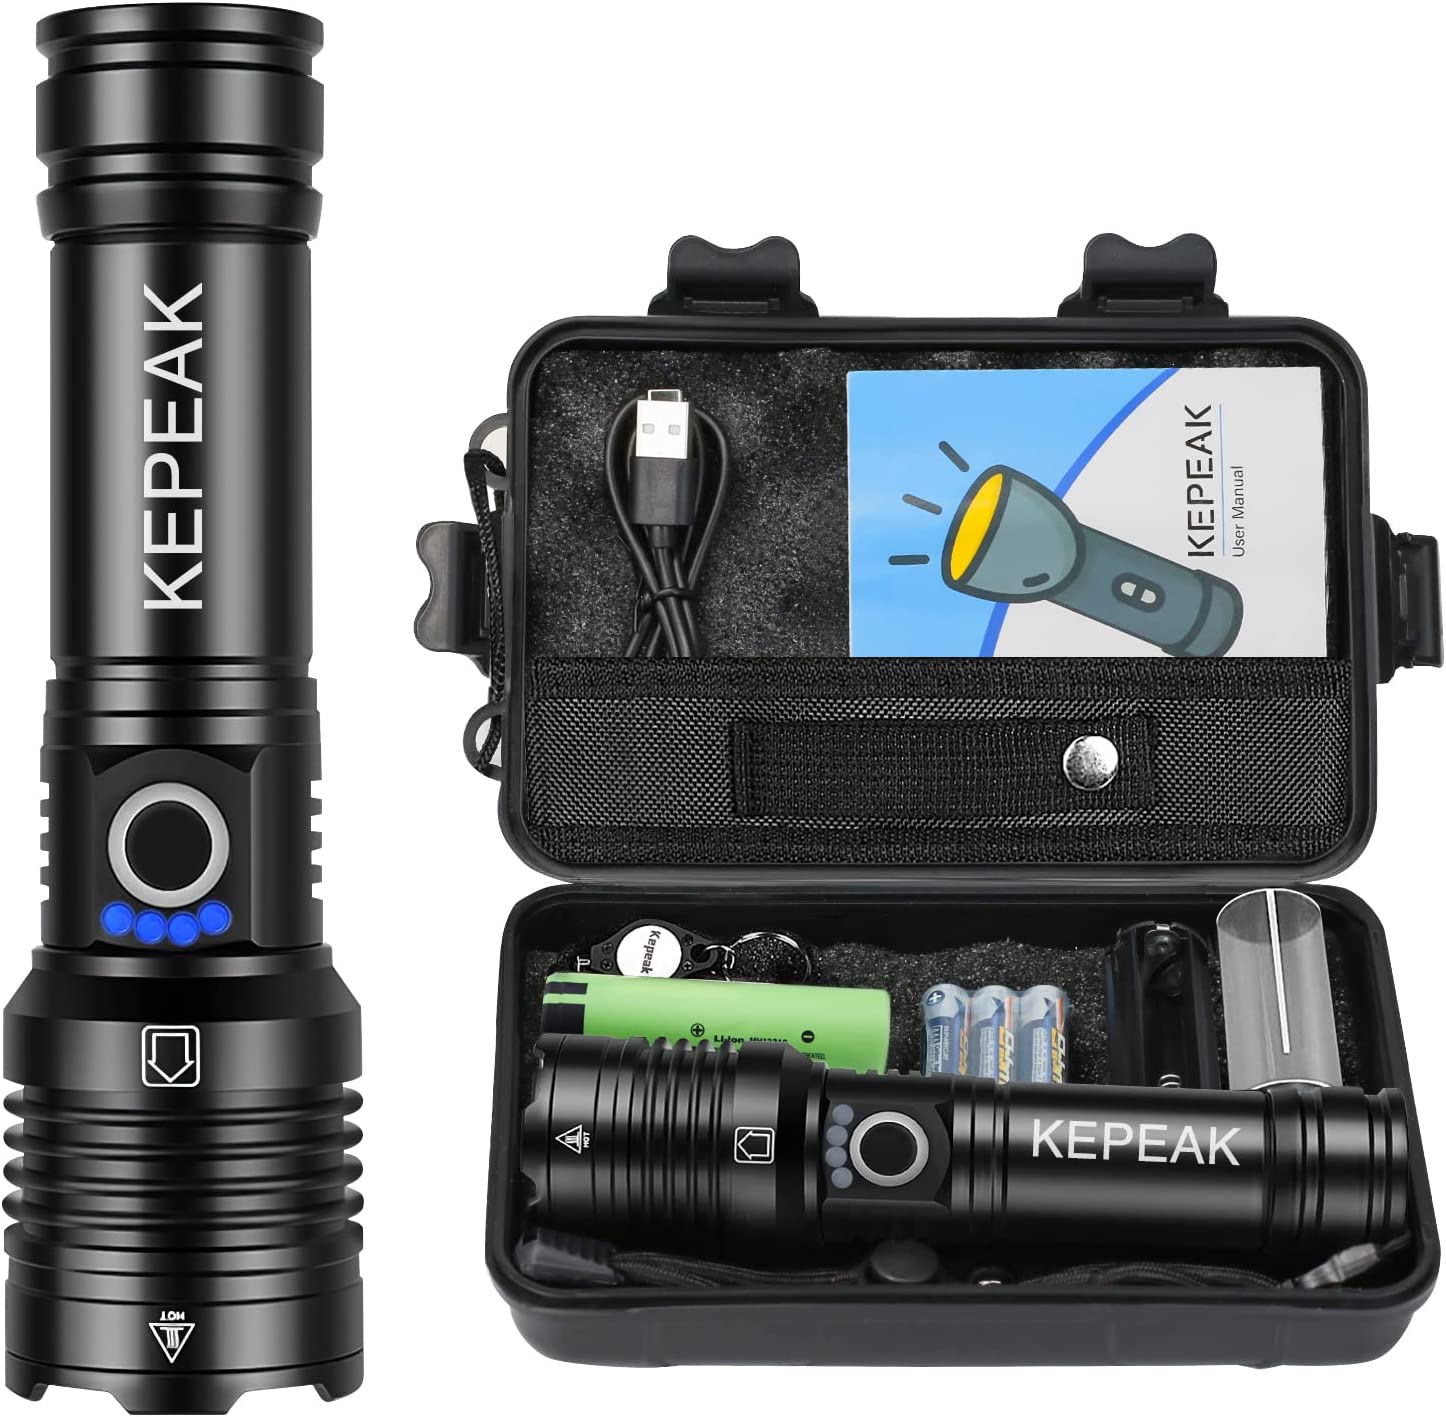 KEPEAK Flashlight High Lumens Rechargeable, 10000 Lumens LED Flash Light, Tactical Handheld Flashlights Super Bright, Zoomable, 5 Modes & Mode Memory, Water Resistant for Emergency Camping Hiking